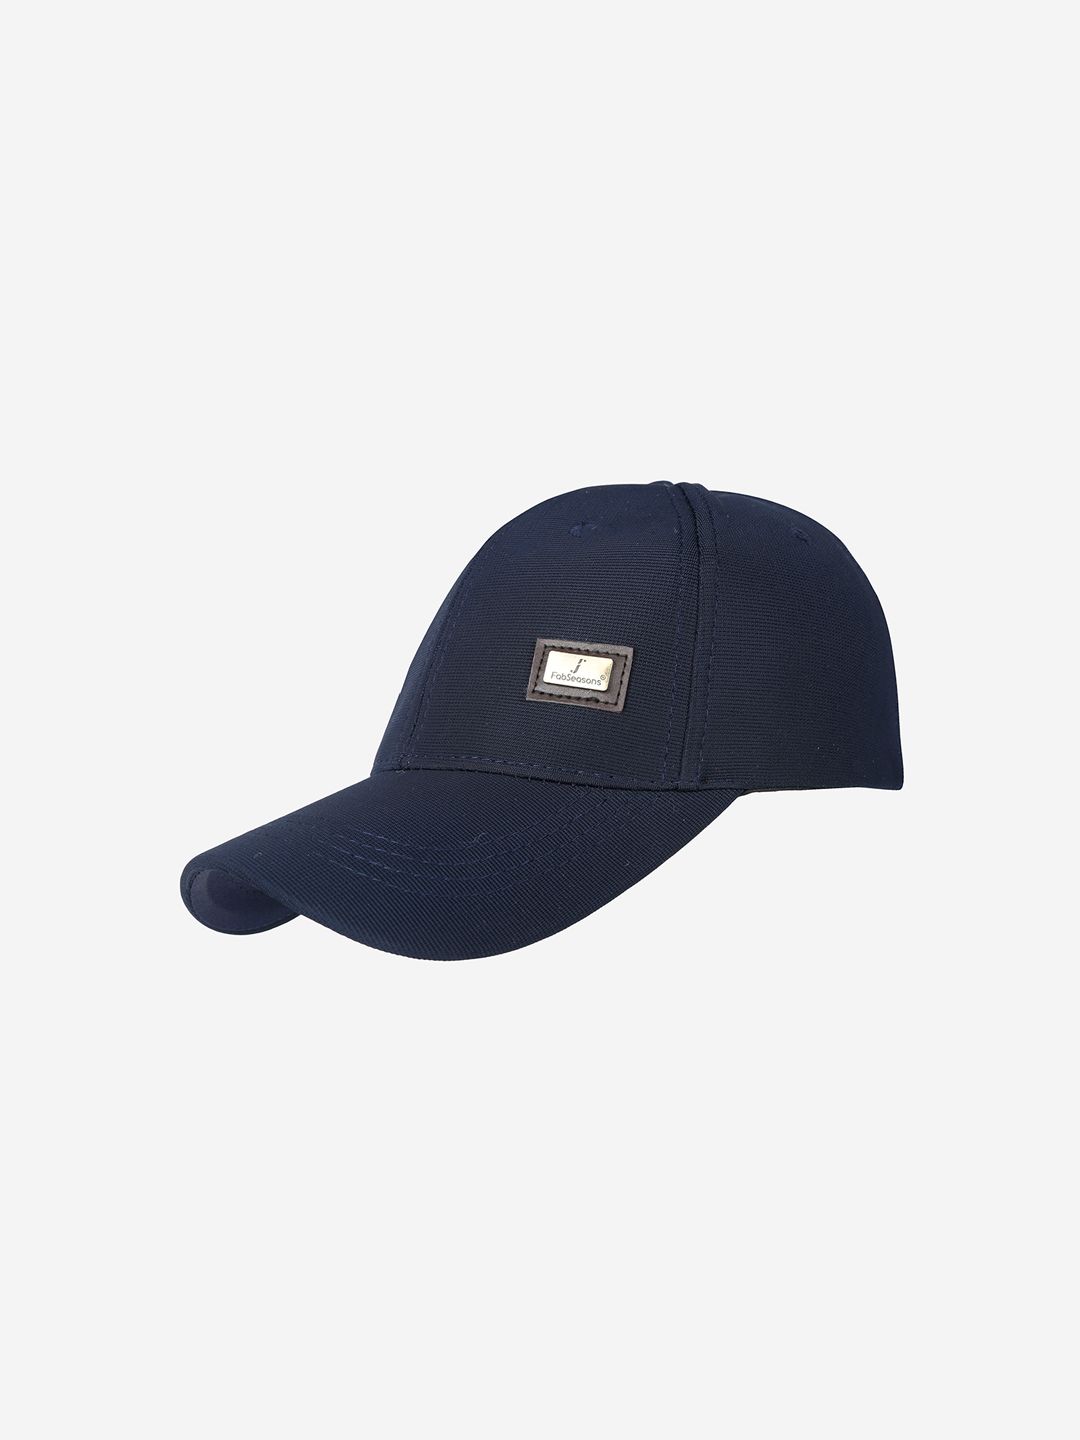 FabSeasons Unisex Blue Solid Baseball Cap Price in India